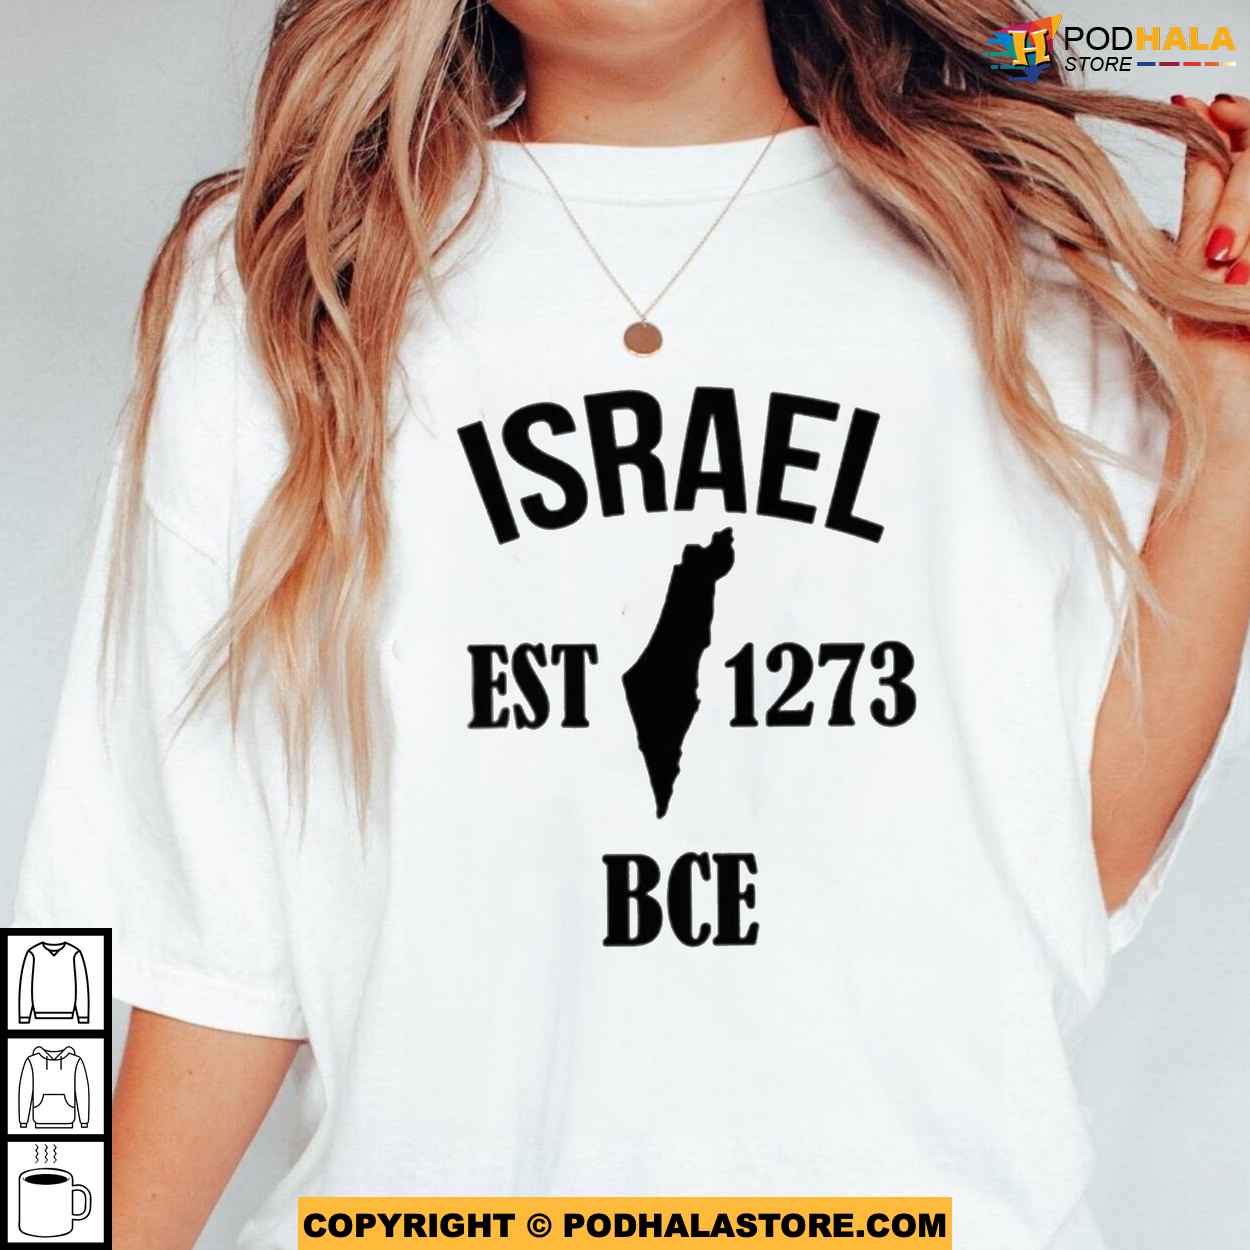 Proudly Israel Est 1273 BCE Shirt, Show Your Heritage